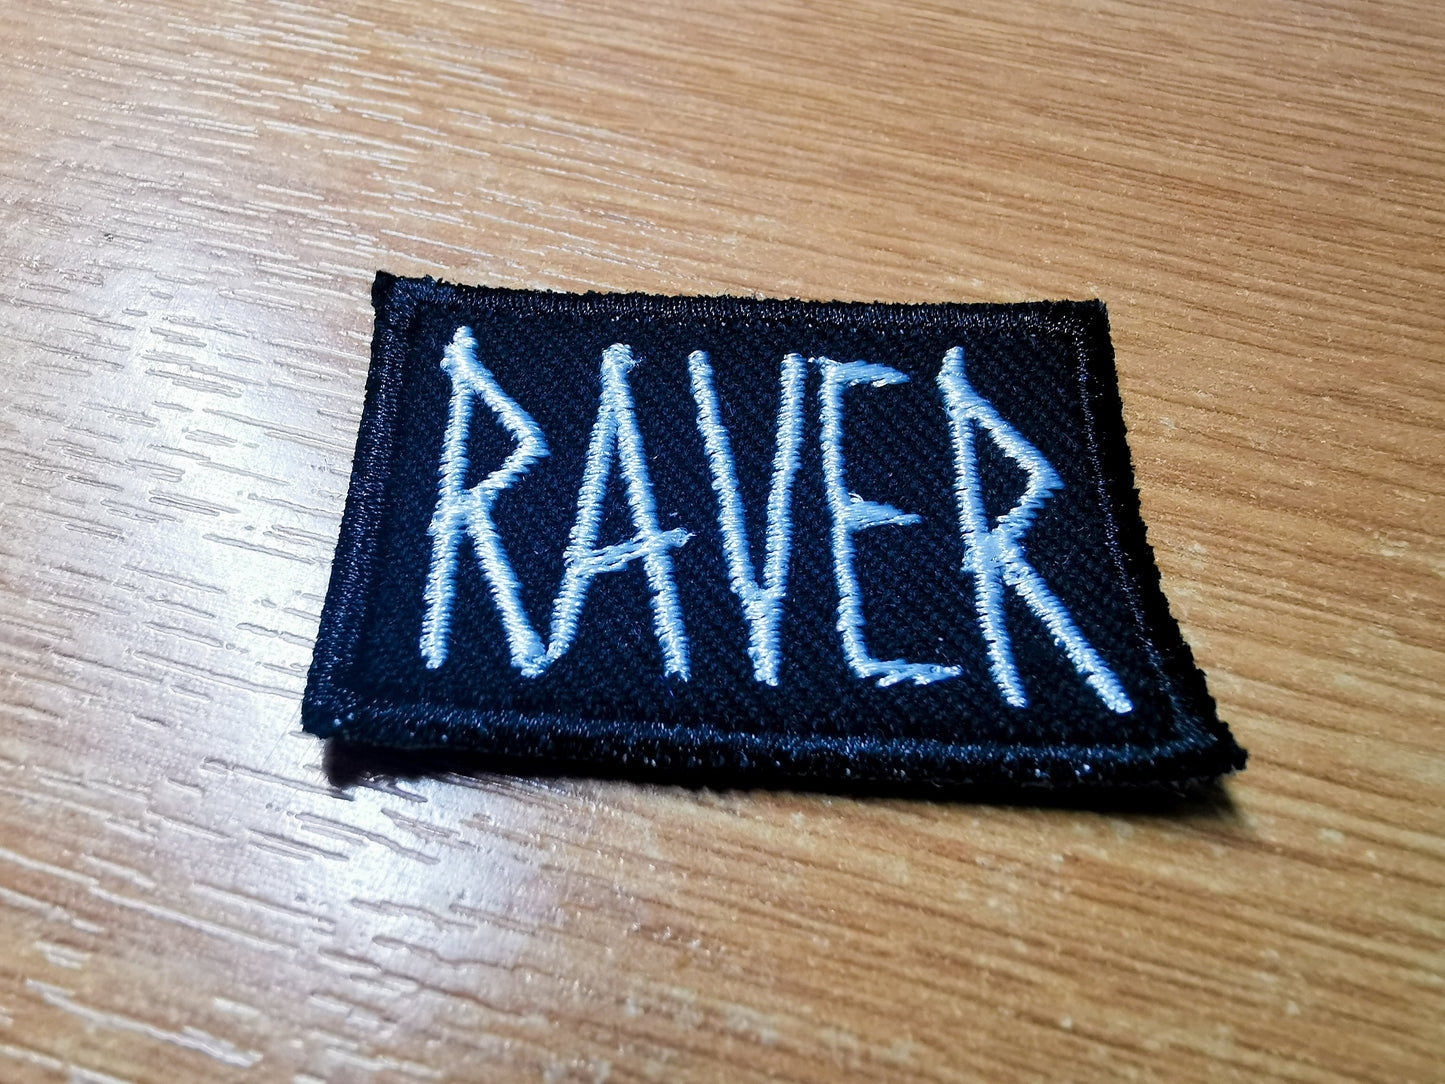 Raver Embroidered Patch Scratchy Text EDM Music Patch for Musicians Iron or Sew on